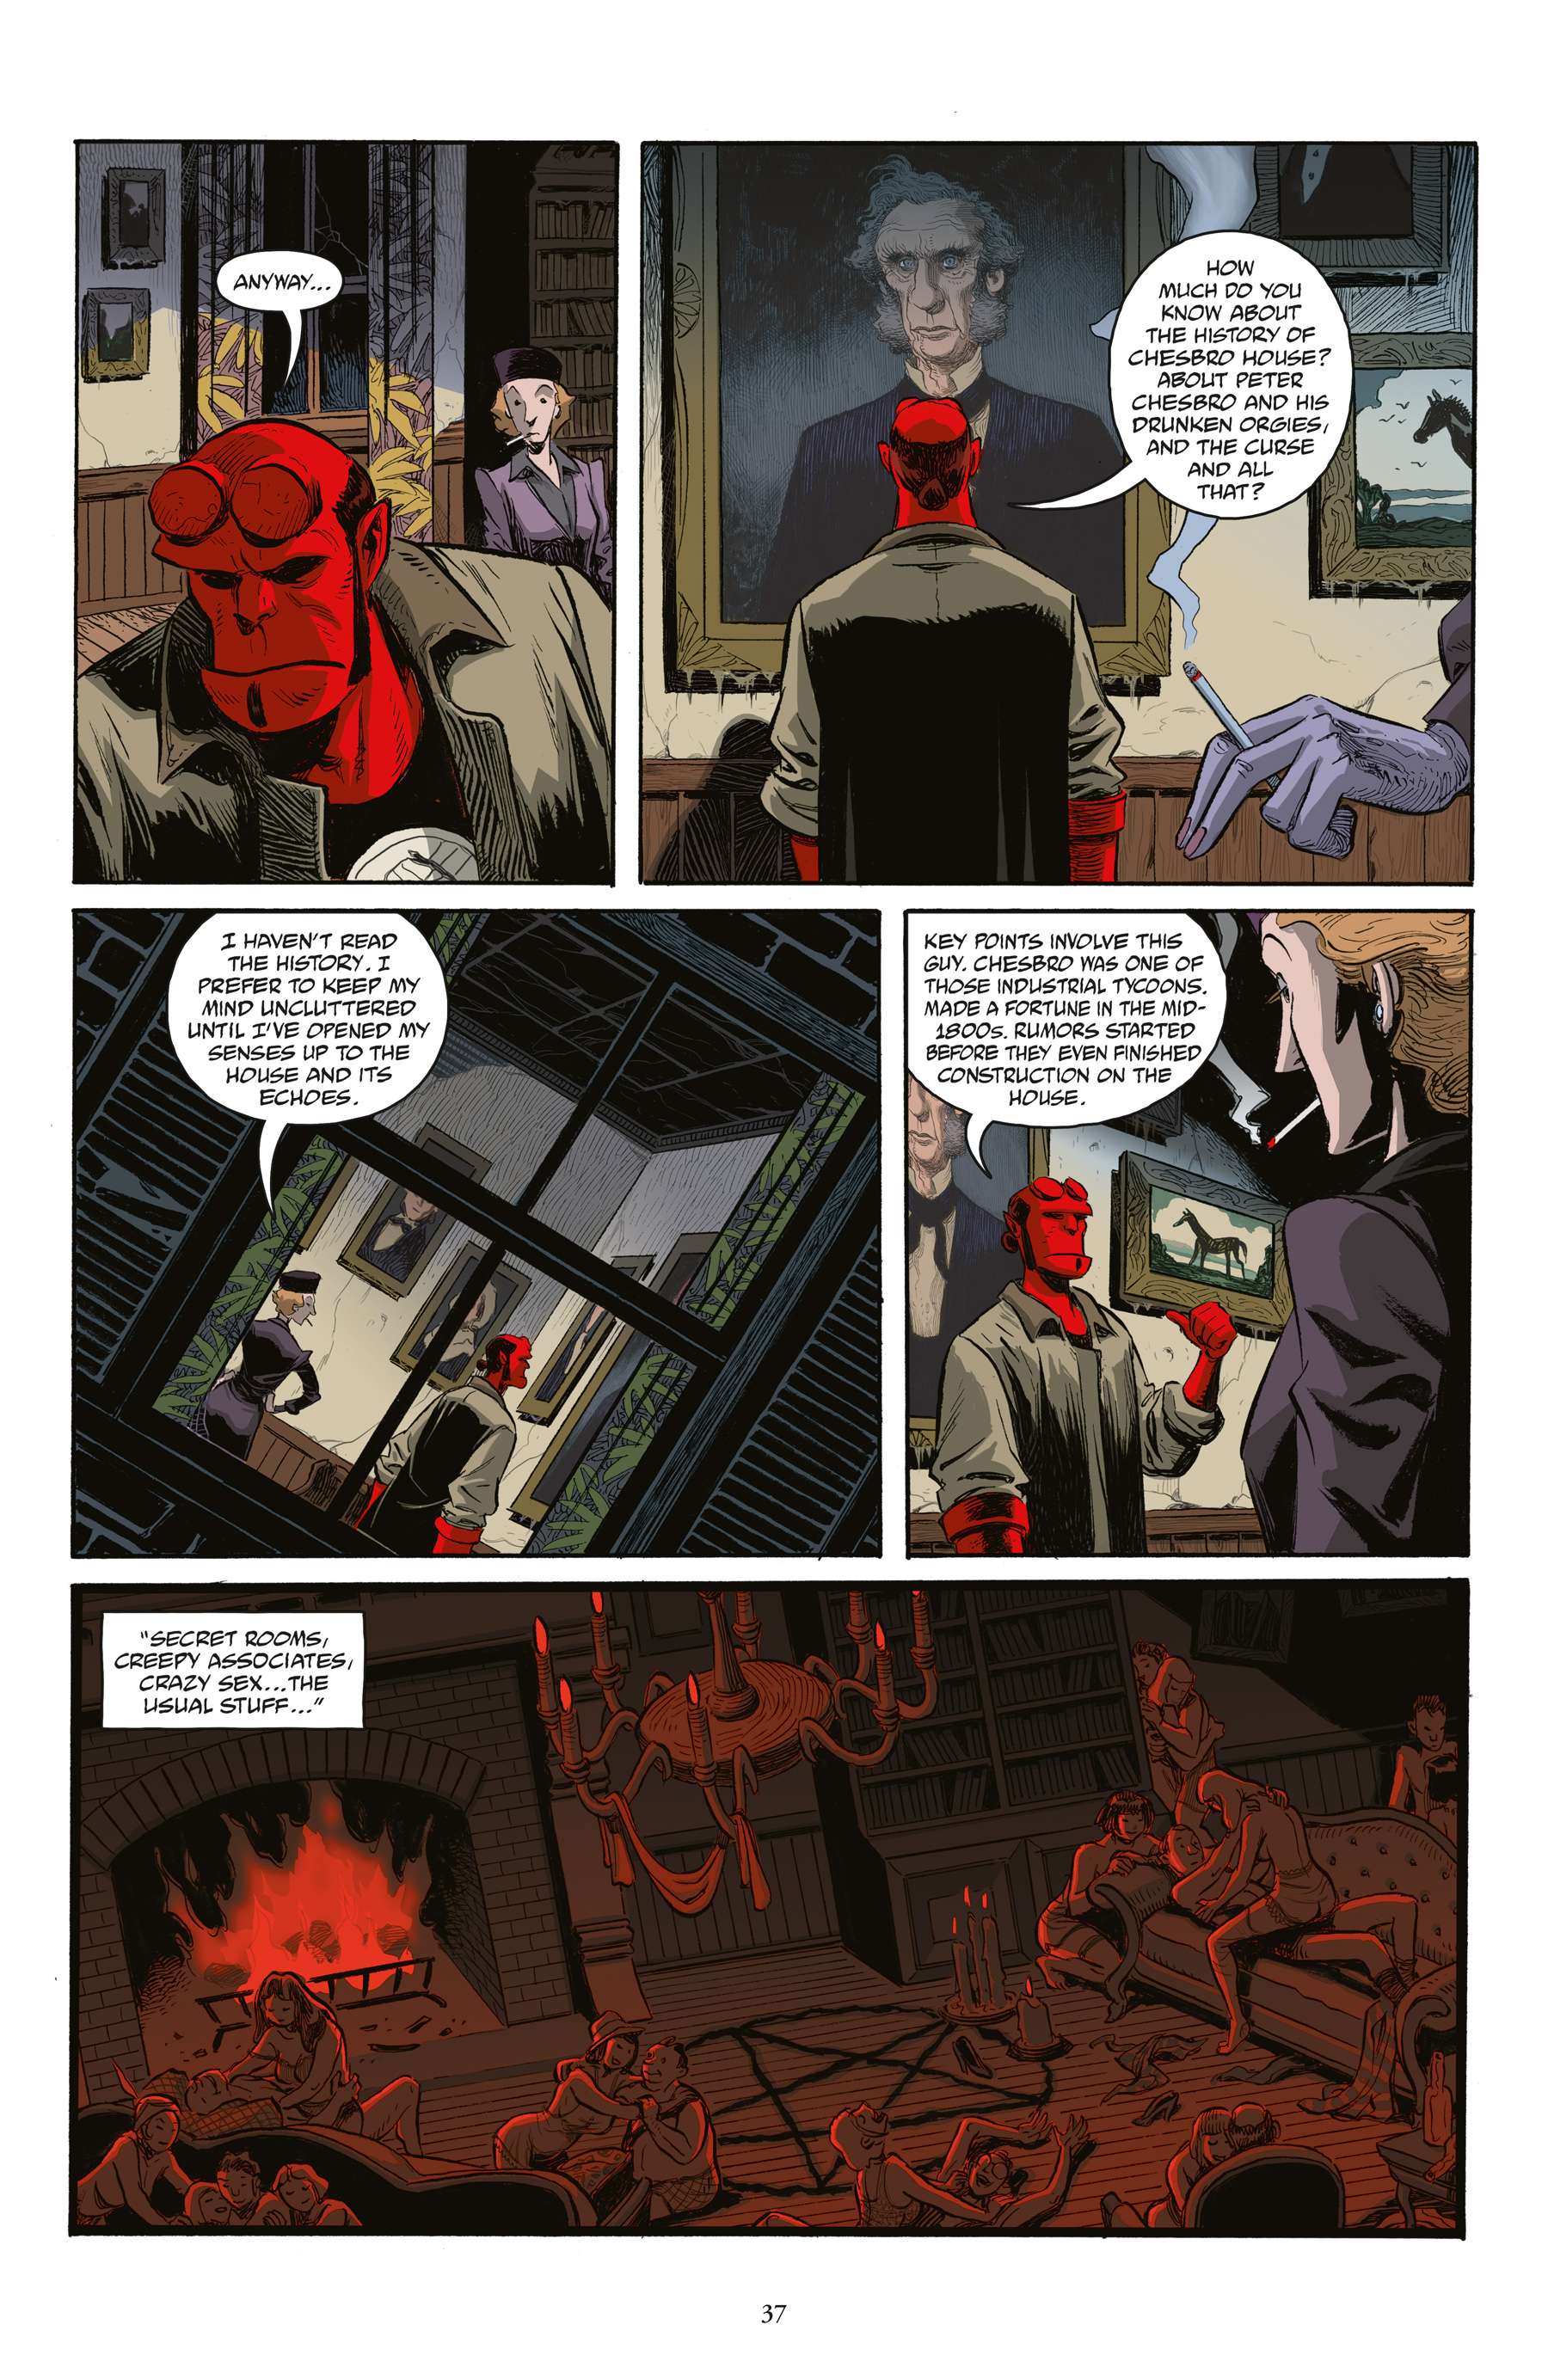 Read online Hellboy and the B.P.R.D.: The Secret of Chesbro House & Others comic -  Issue # TPB (Part 1) - 37